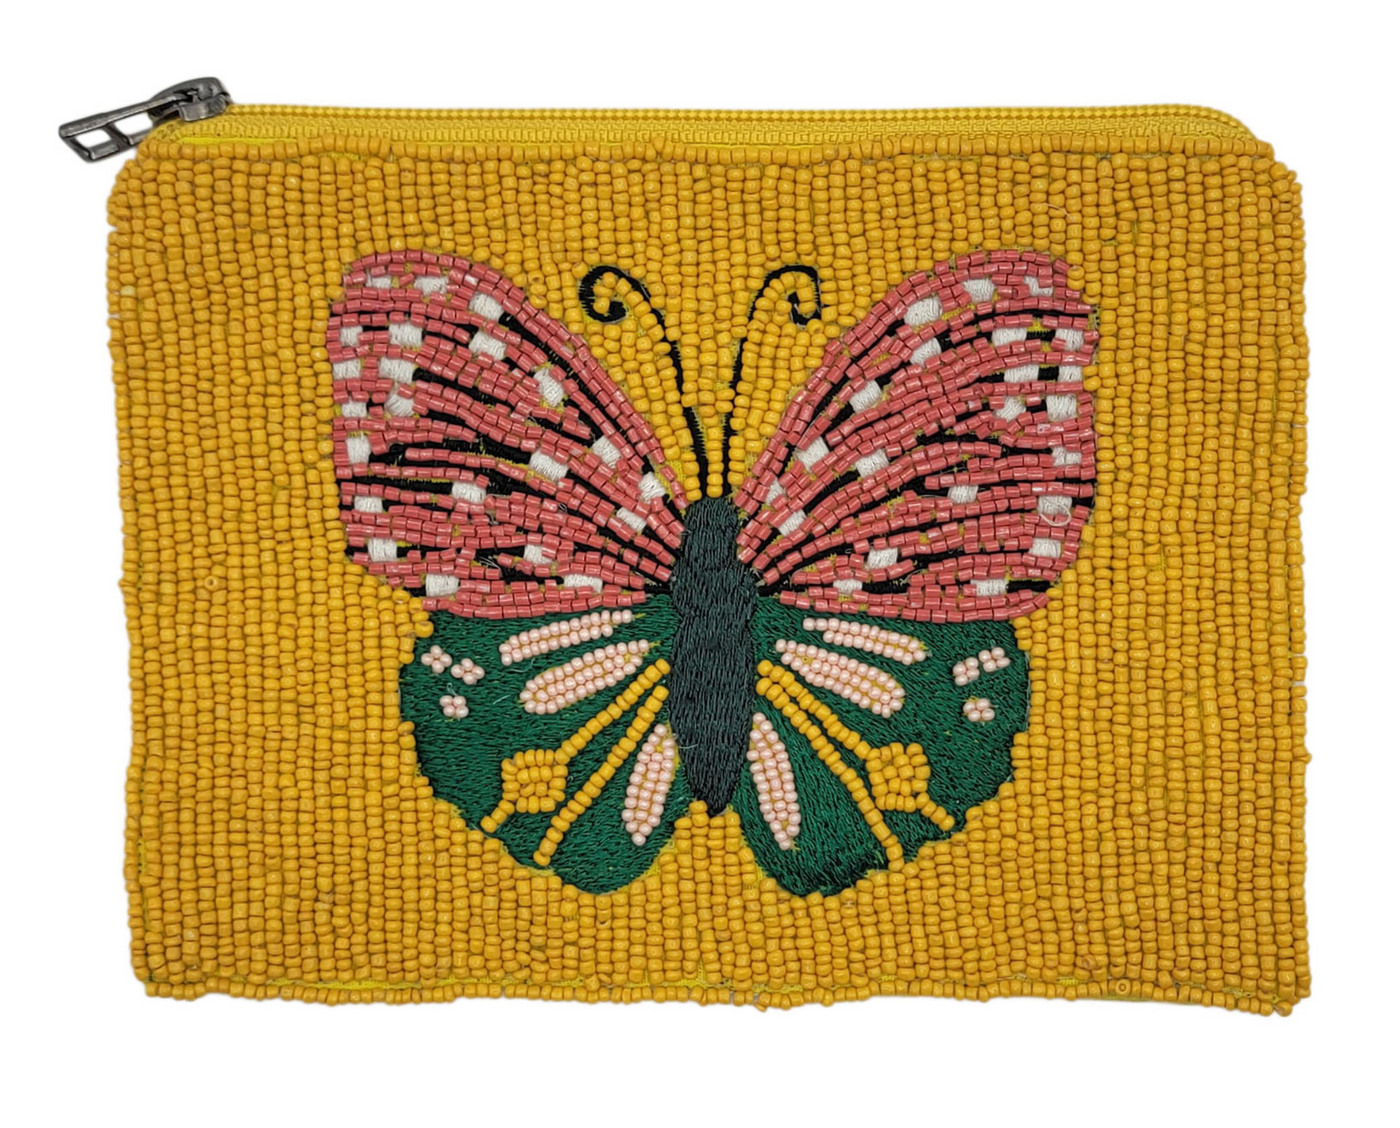 Beaded Pouch